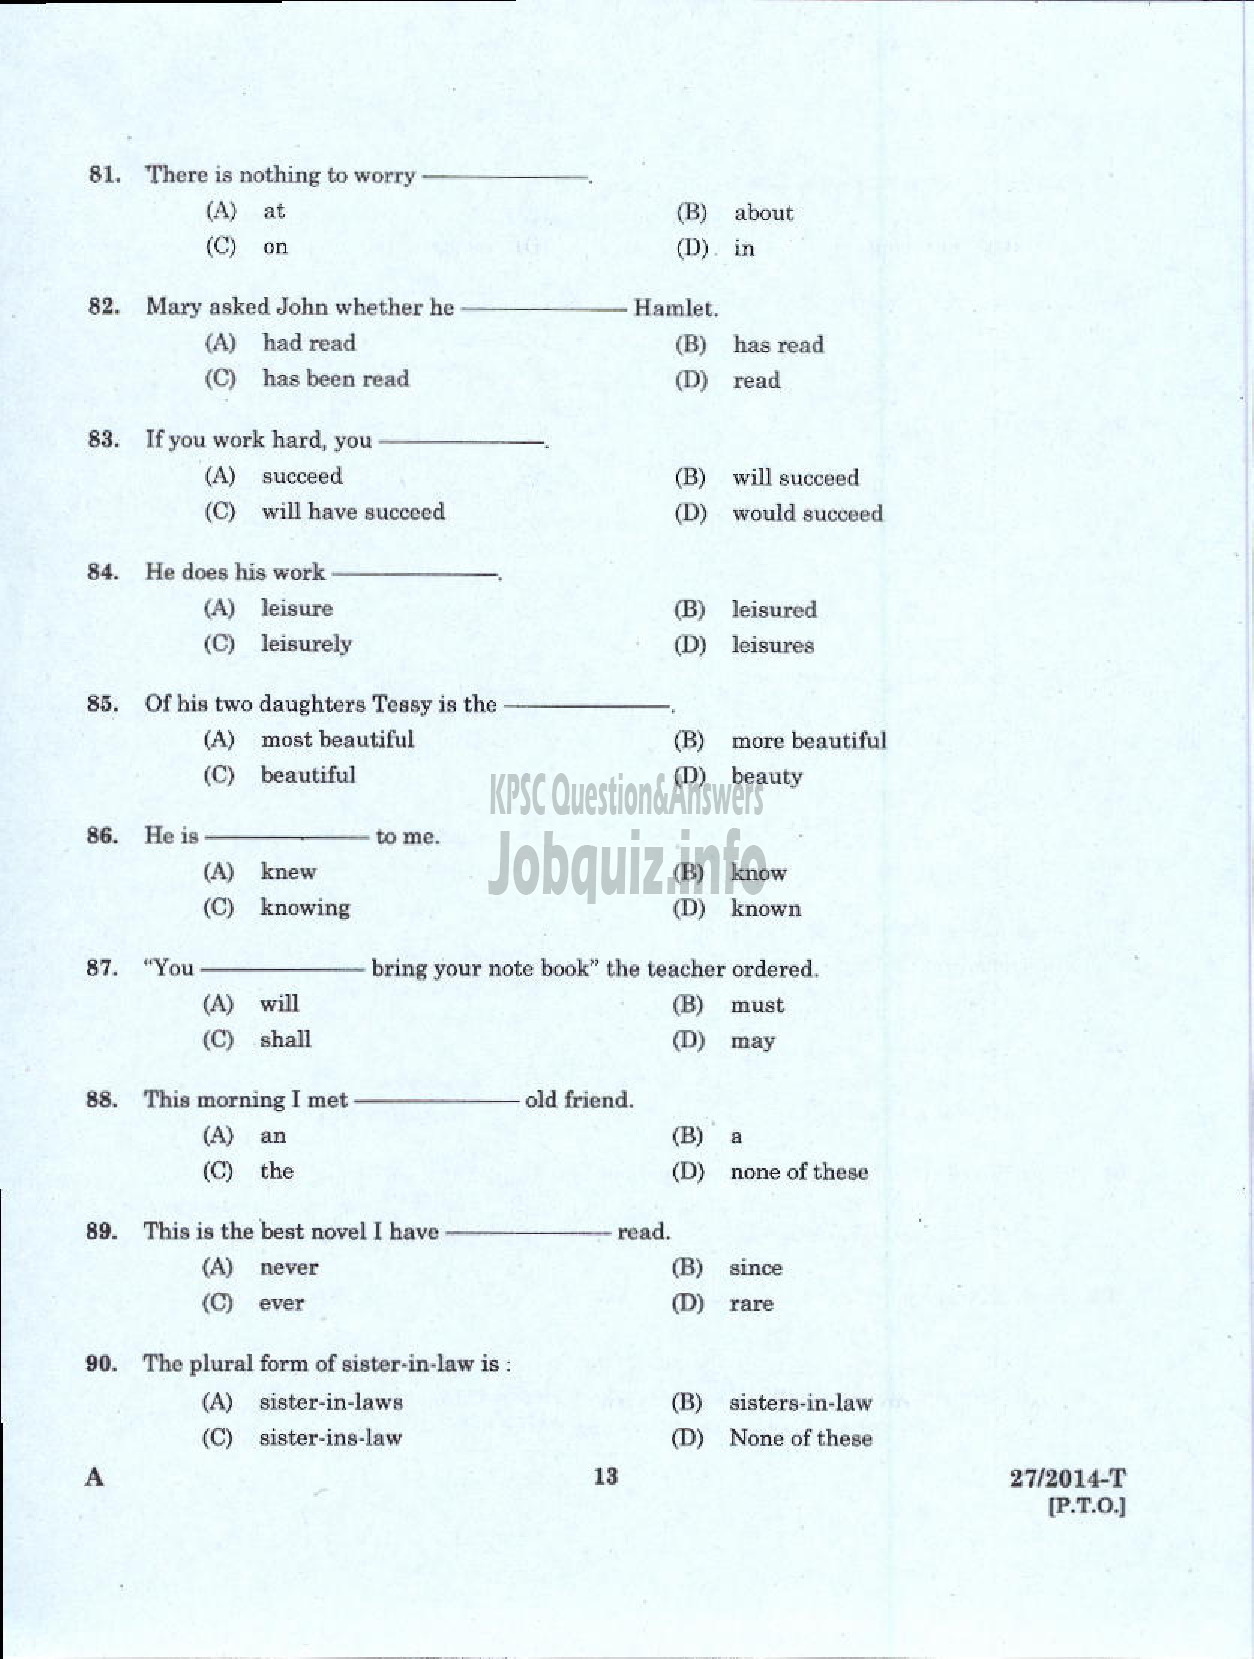 Kerala PSC Question Paper - LOWER DIVISION CLERK 2014 VARIOUS BY TRANSFER ( Tamil )-11